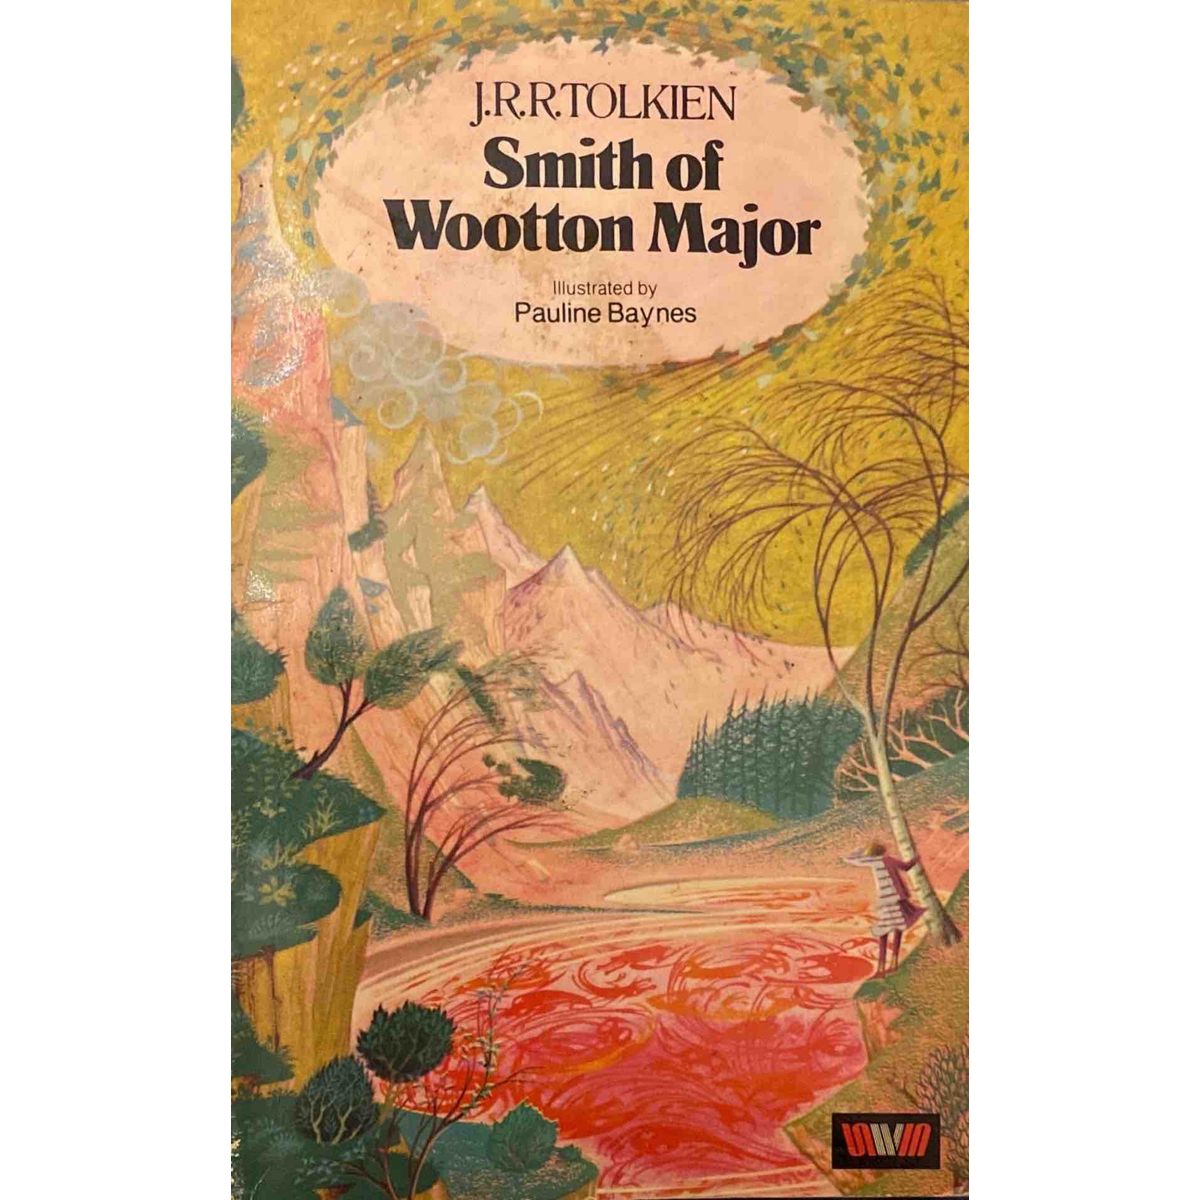 ISBN: 9780048232328 / 0048232327 - Smith of Wootton Major by J.R.R. Tolkien [1983]